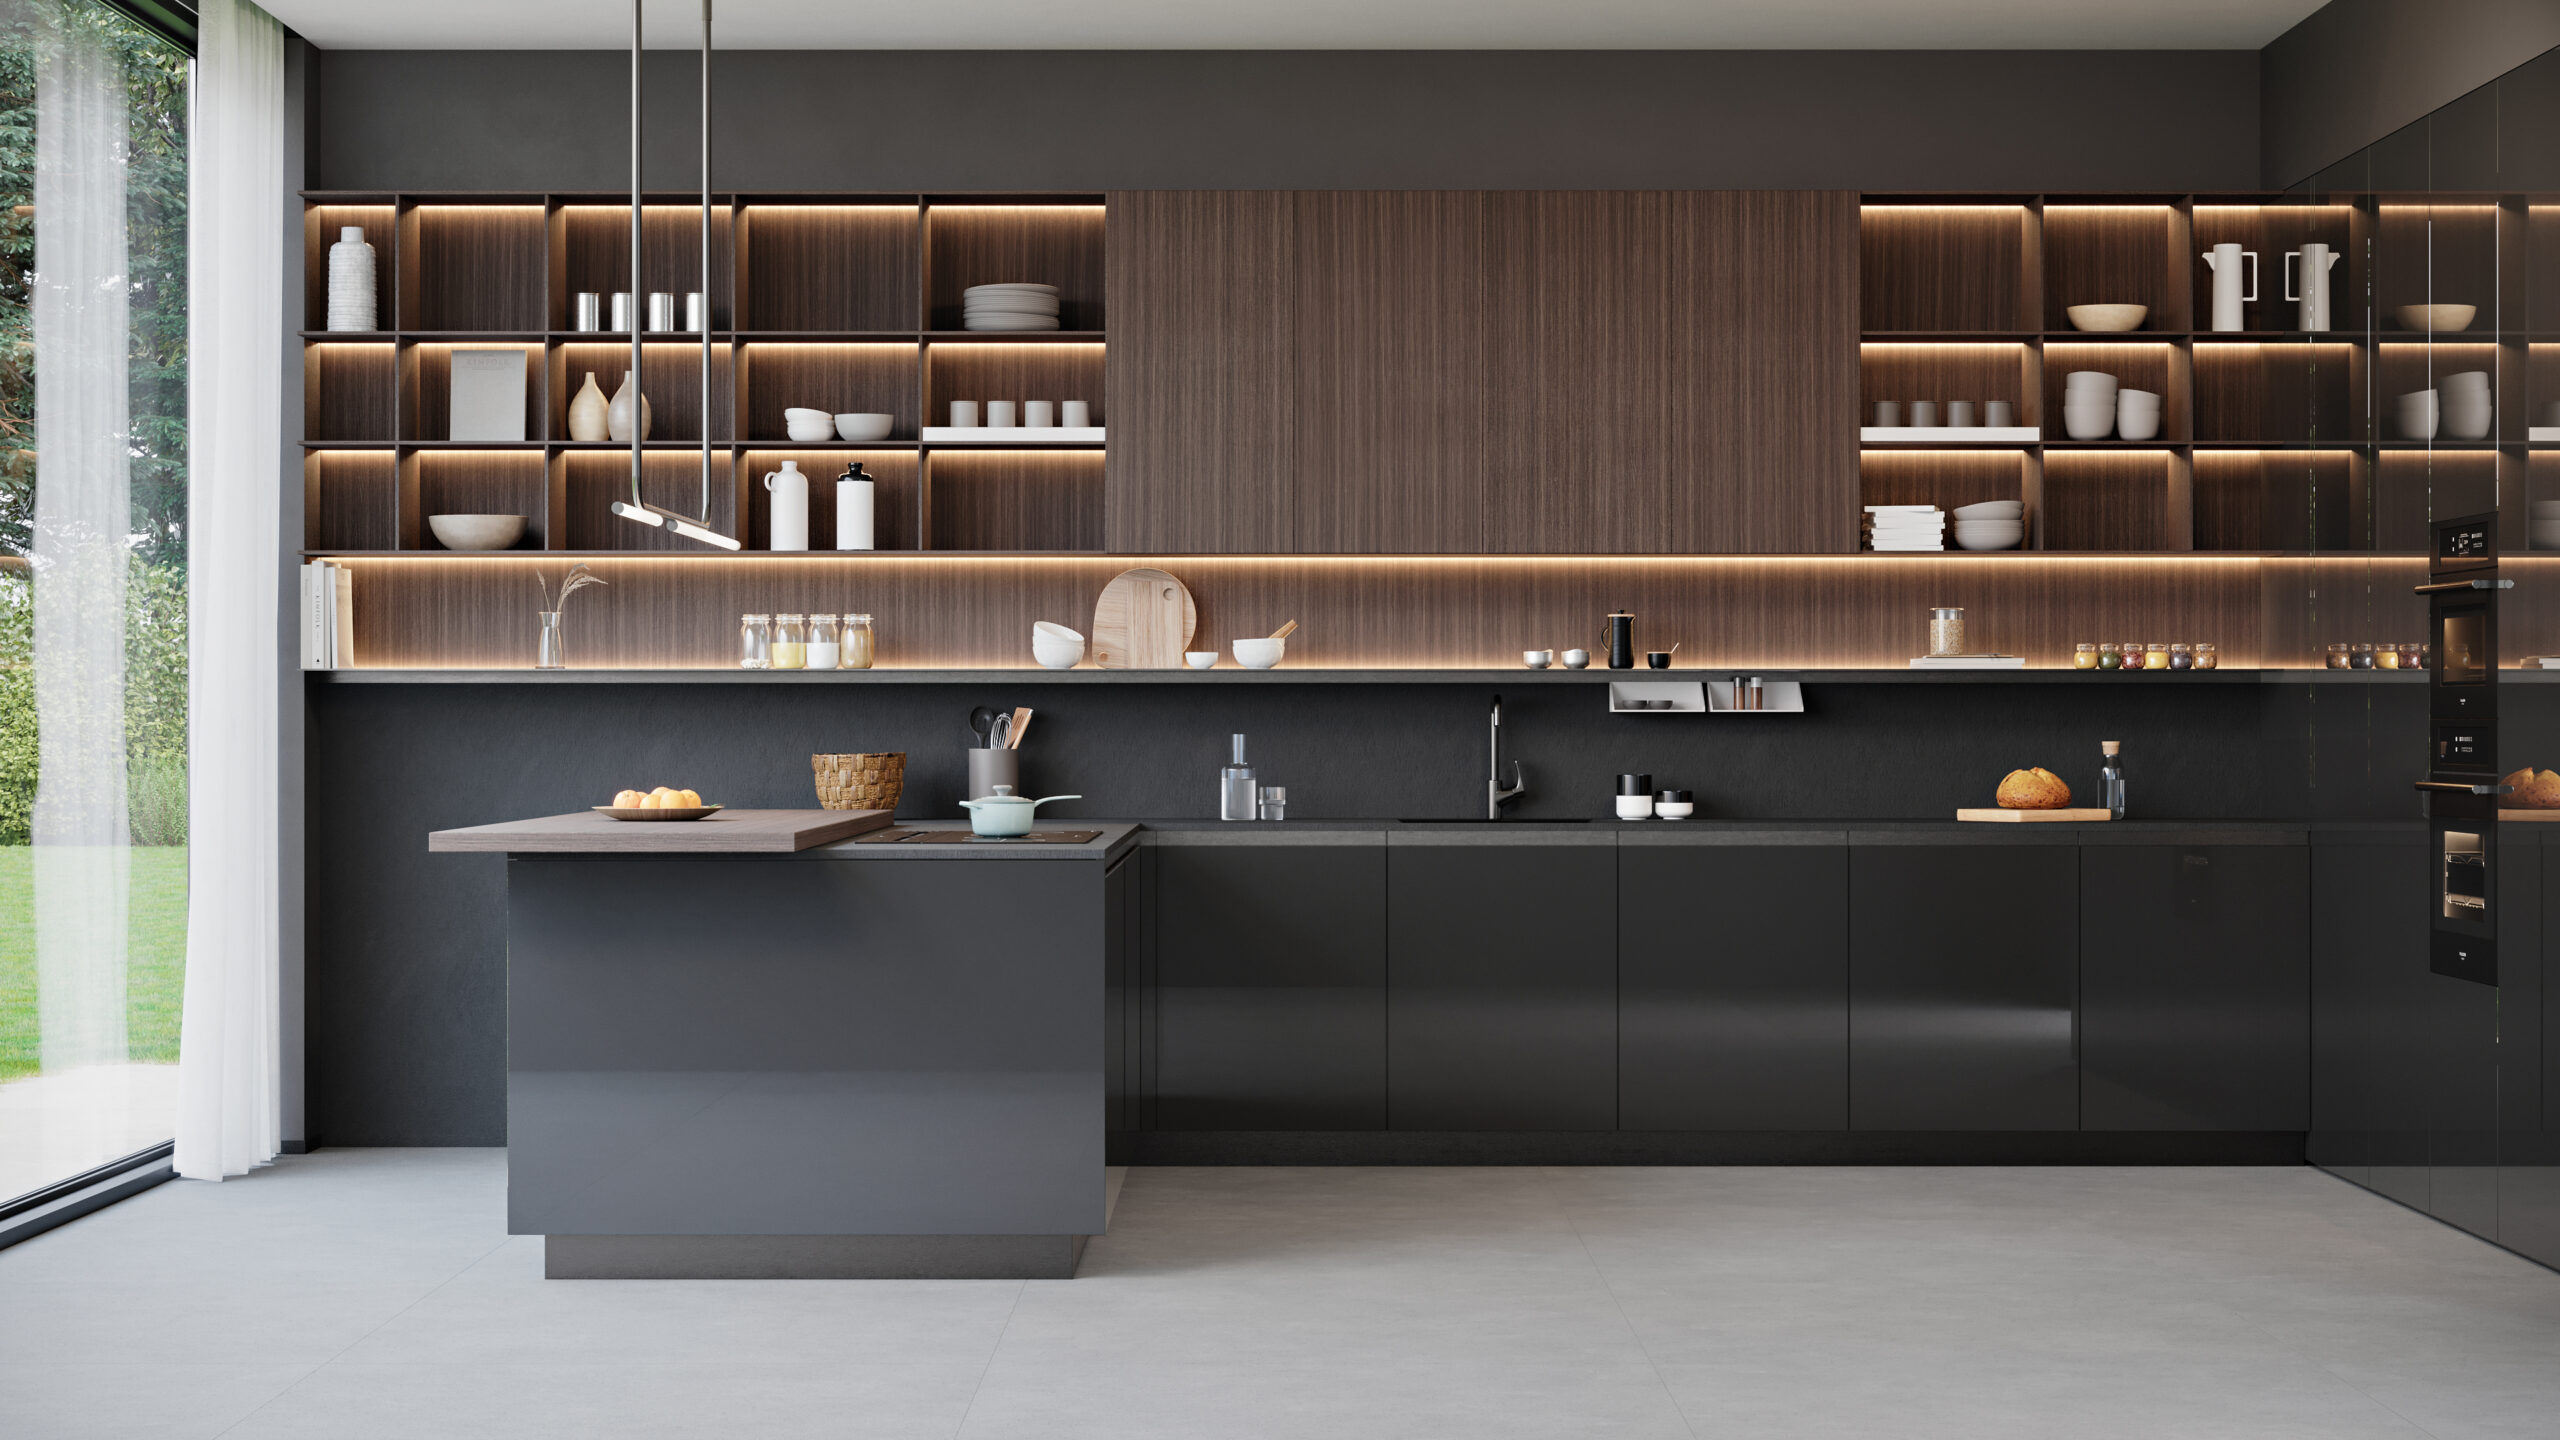 Image of a kitchen with cabinets made with Thermally Fused Laminate in color Espresso and Acrylic Laminates in Charcoal in Gloss finish by Duramar.